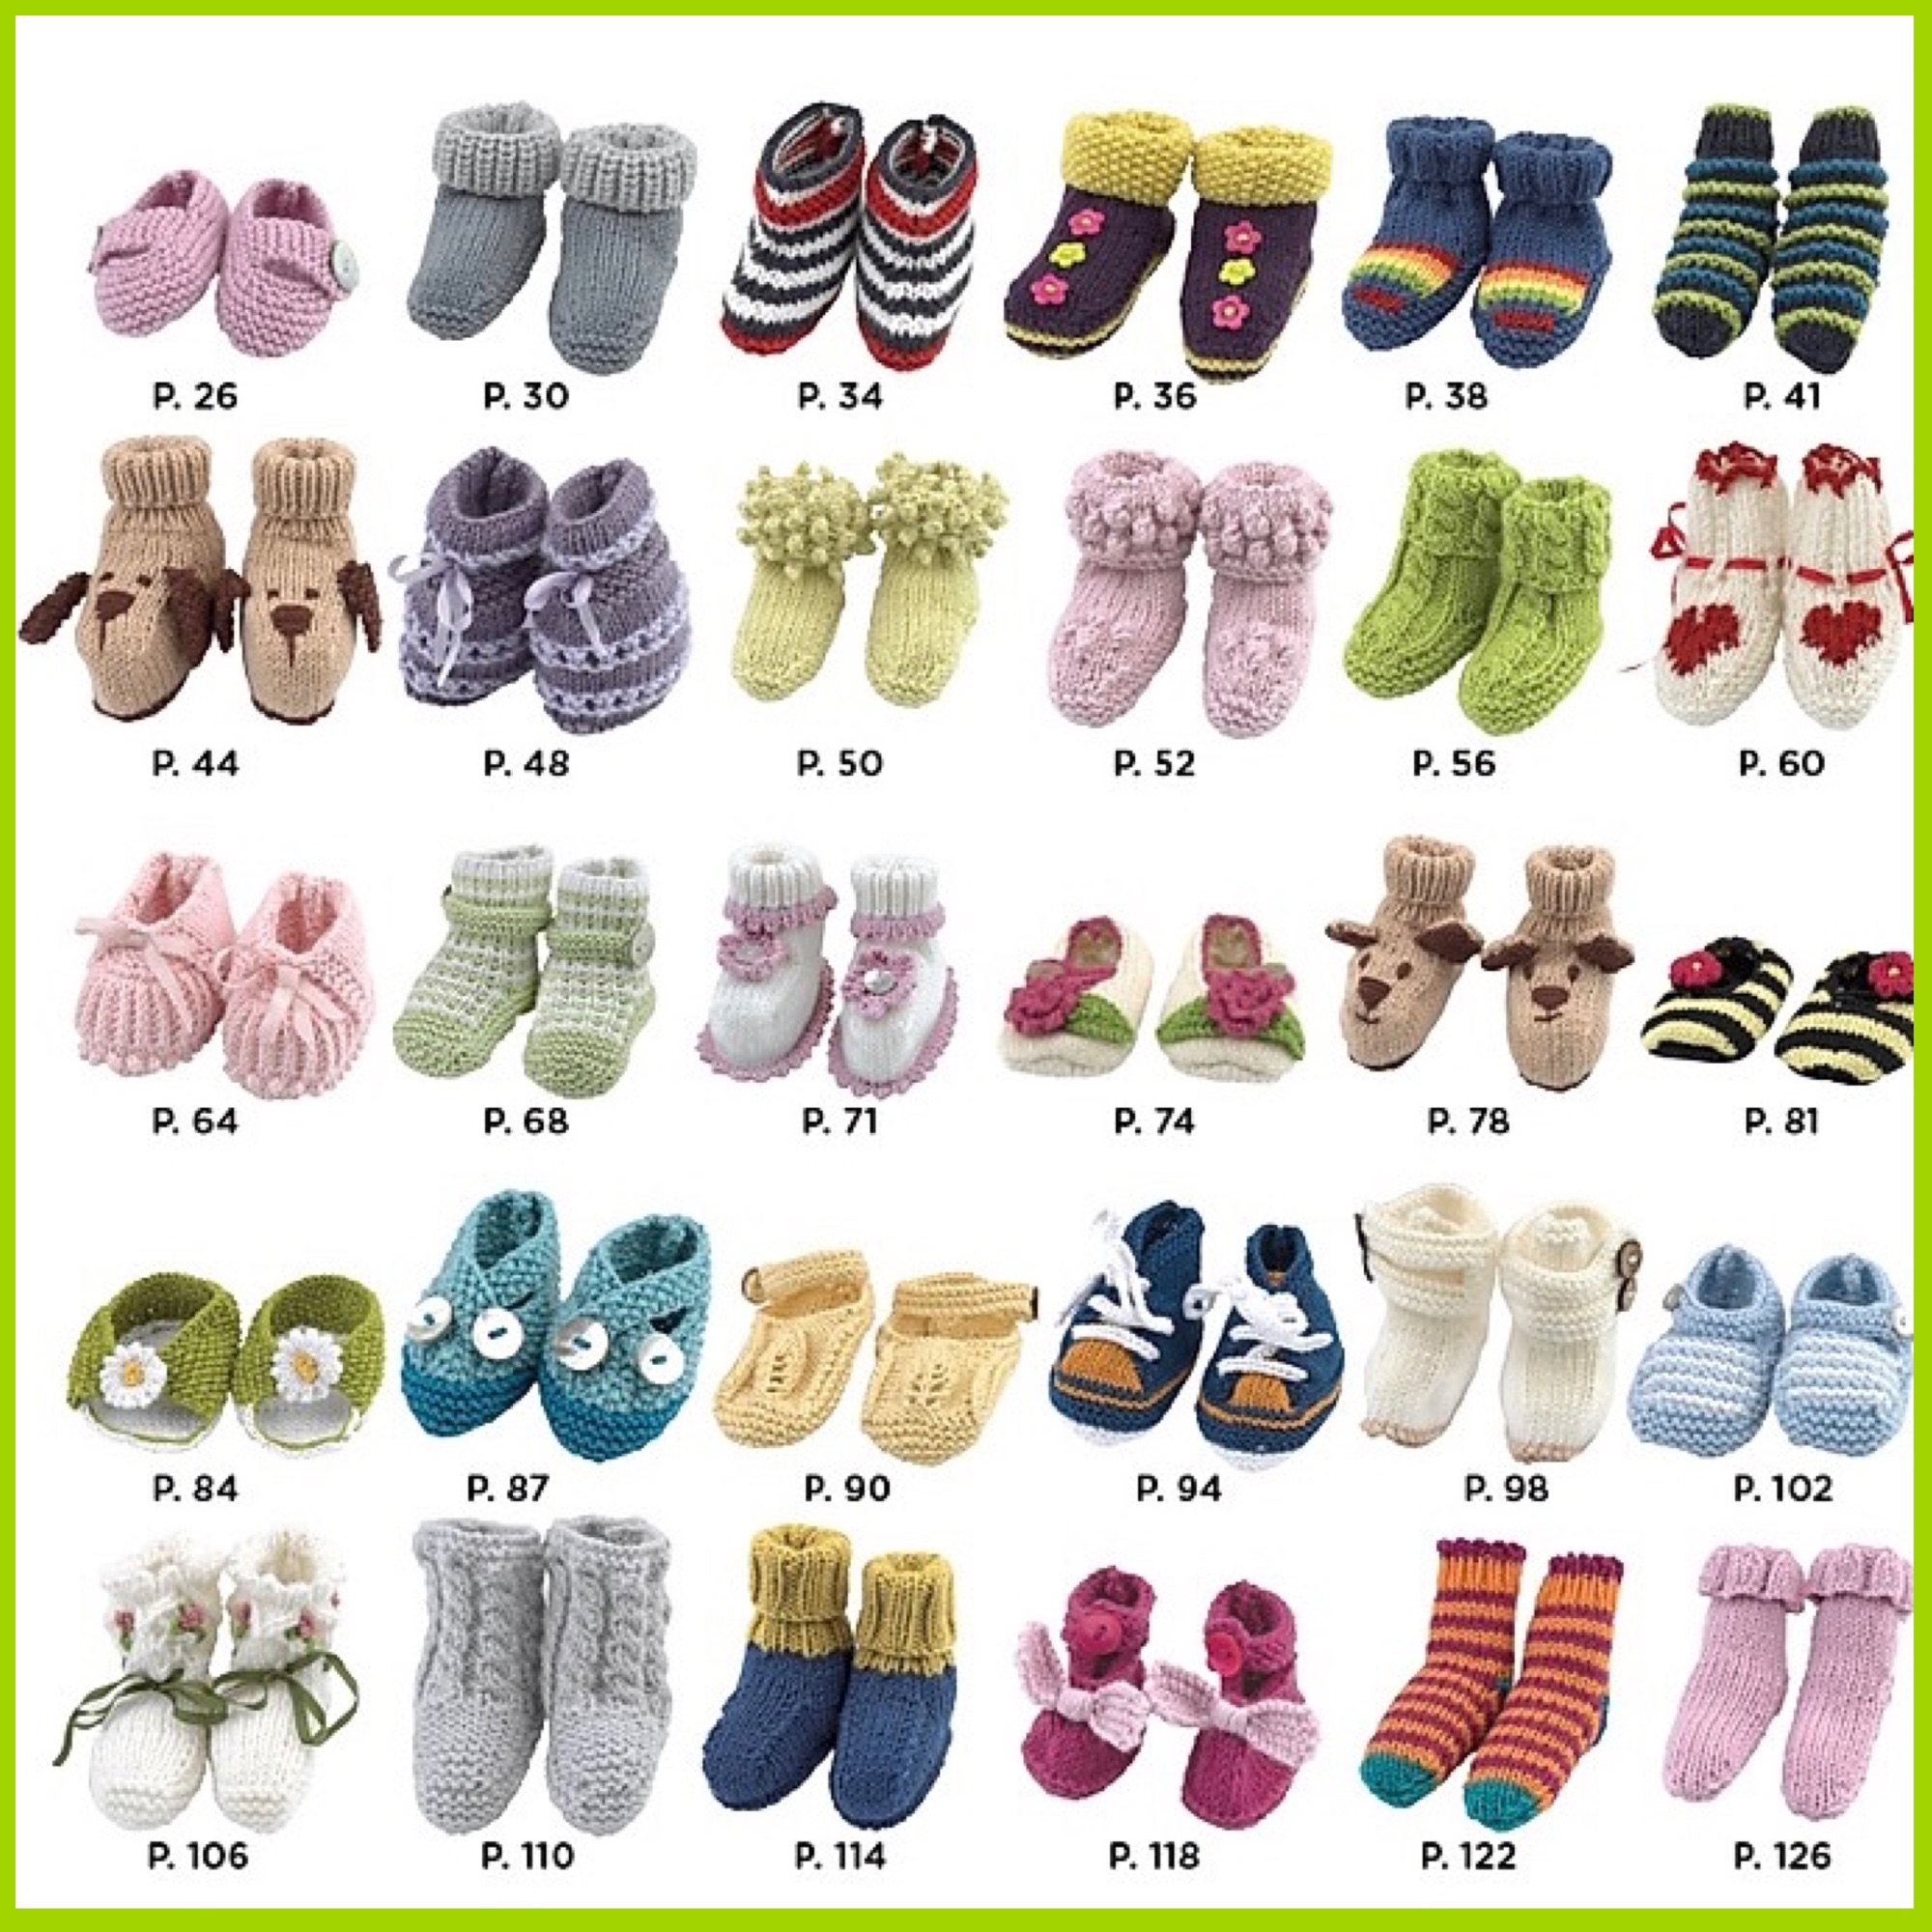 Tuva little knits for little feet book jody long 30 baby booties sandals so